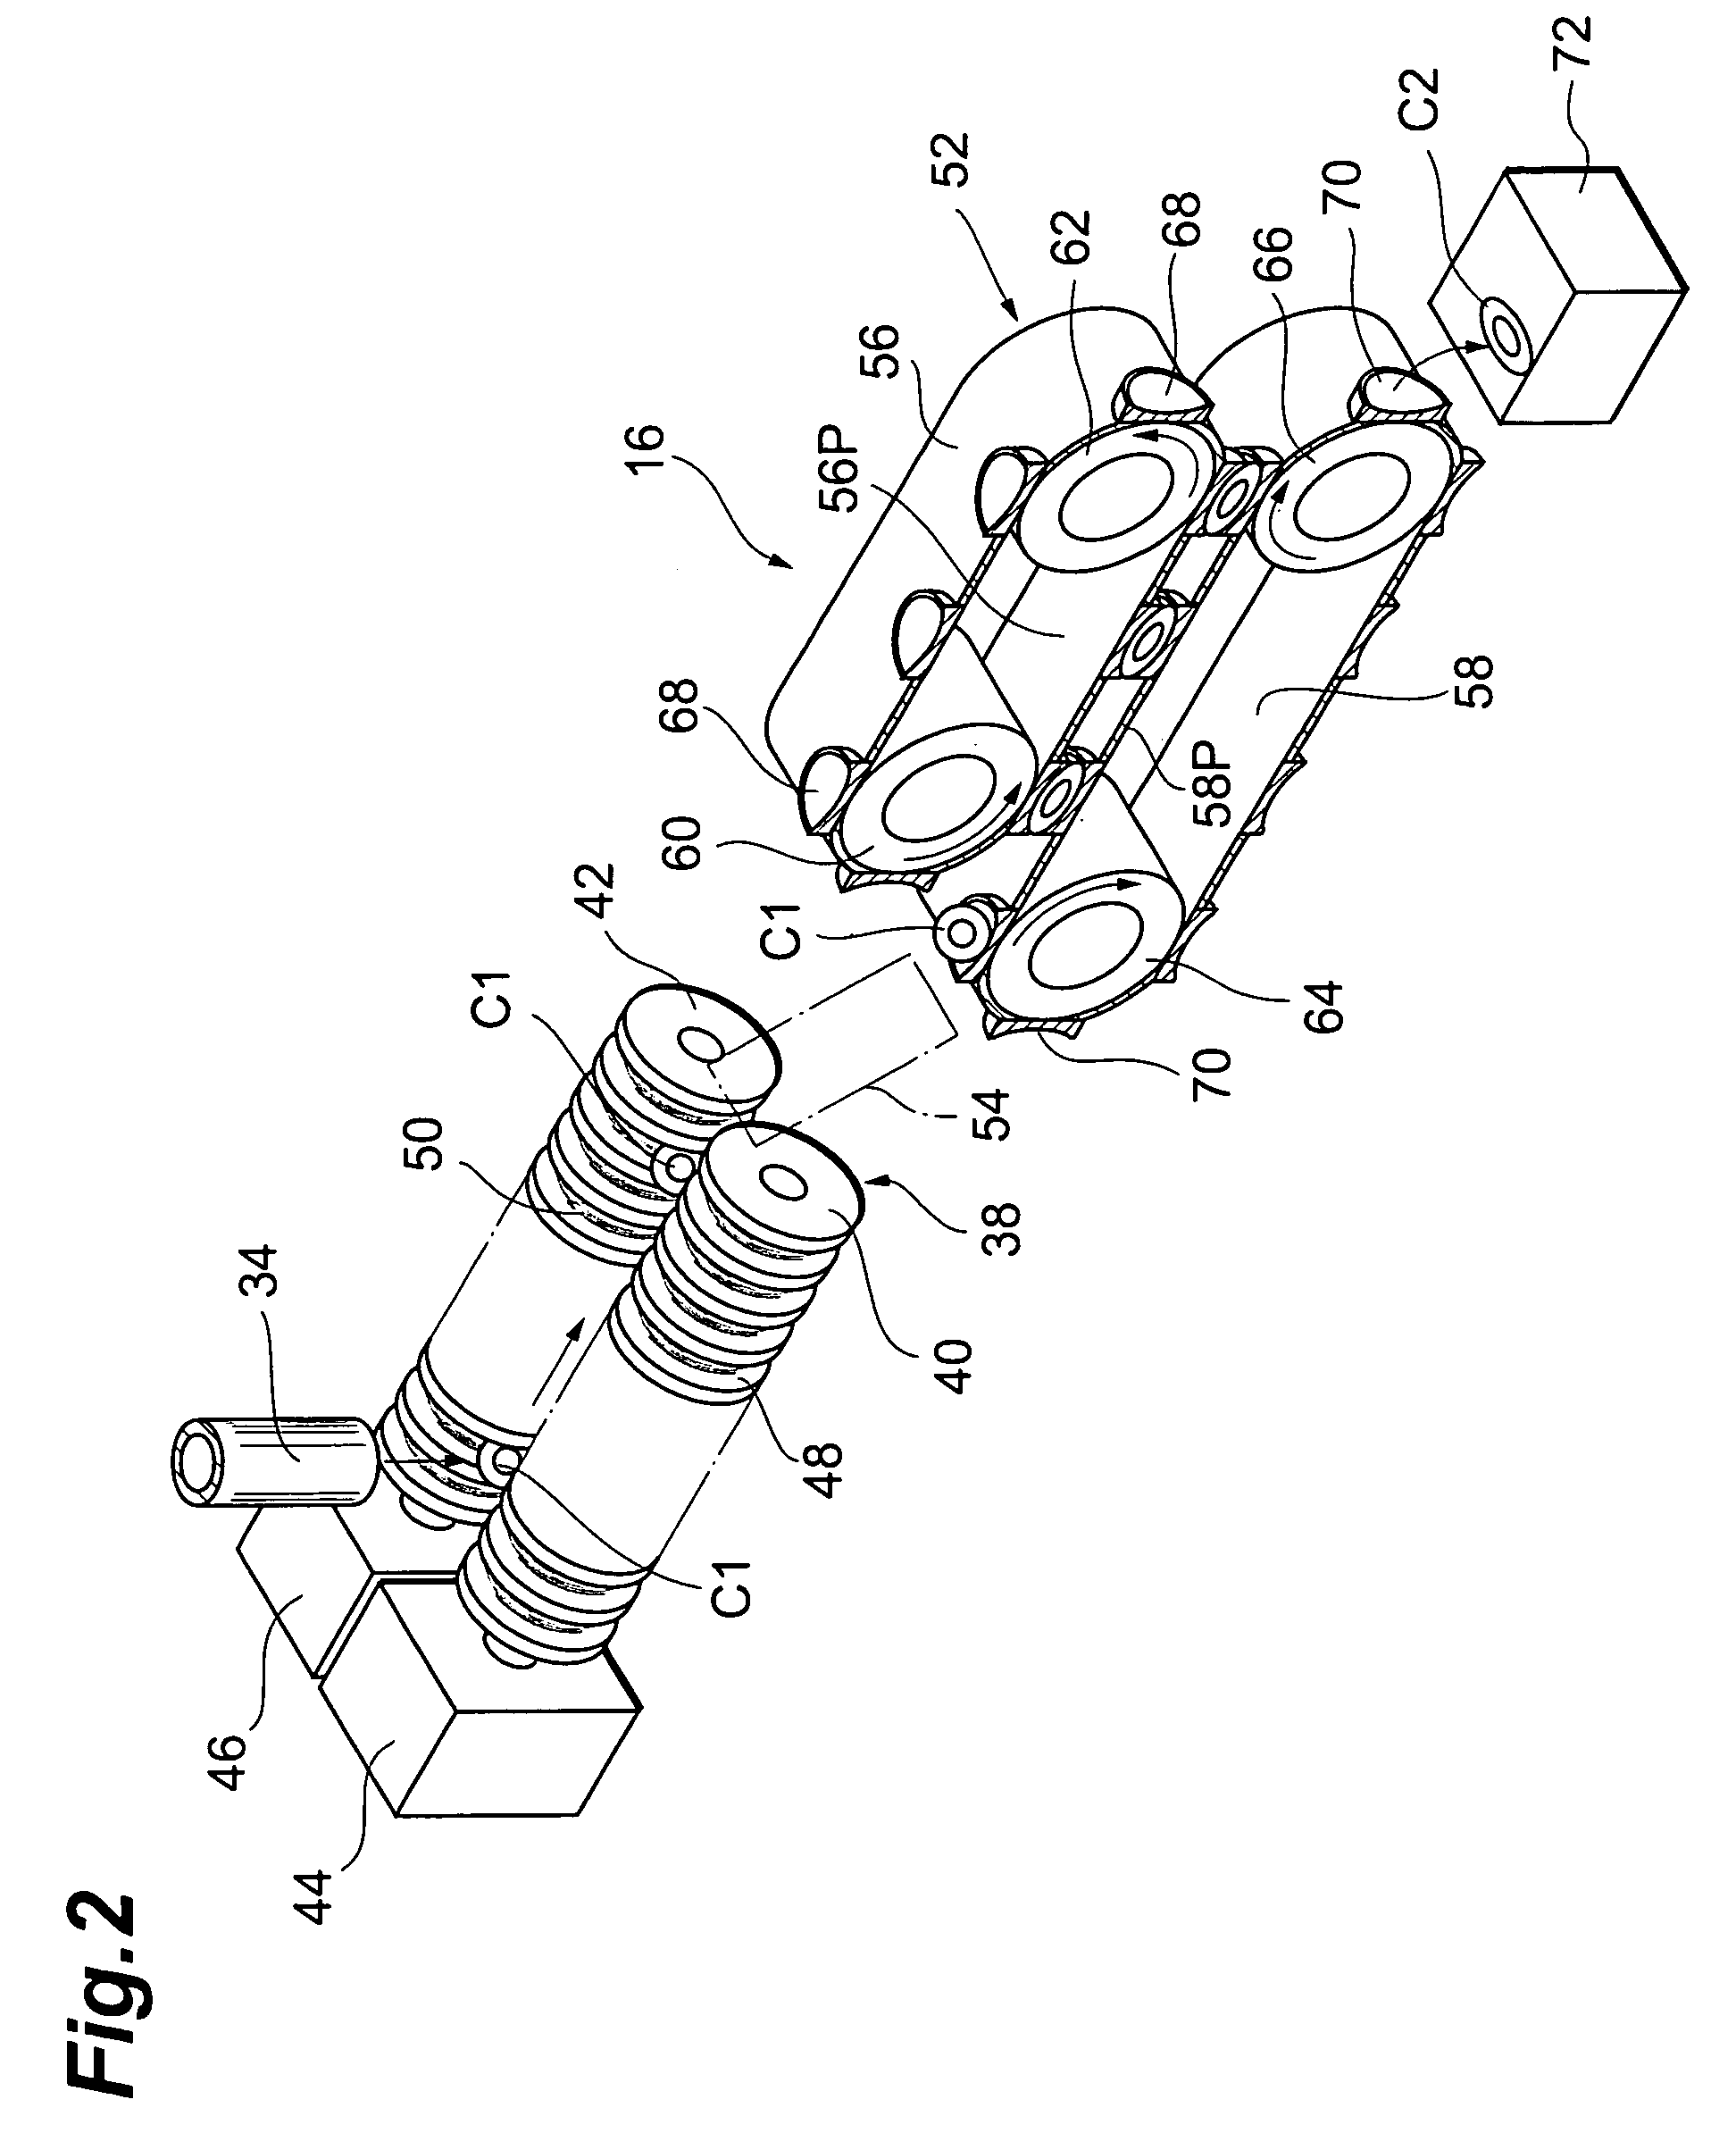 Process for producing aspheric seamless capsule and apparatus therefor